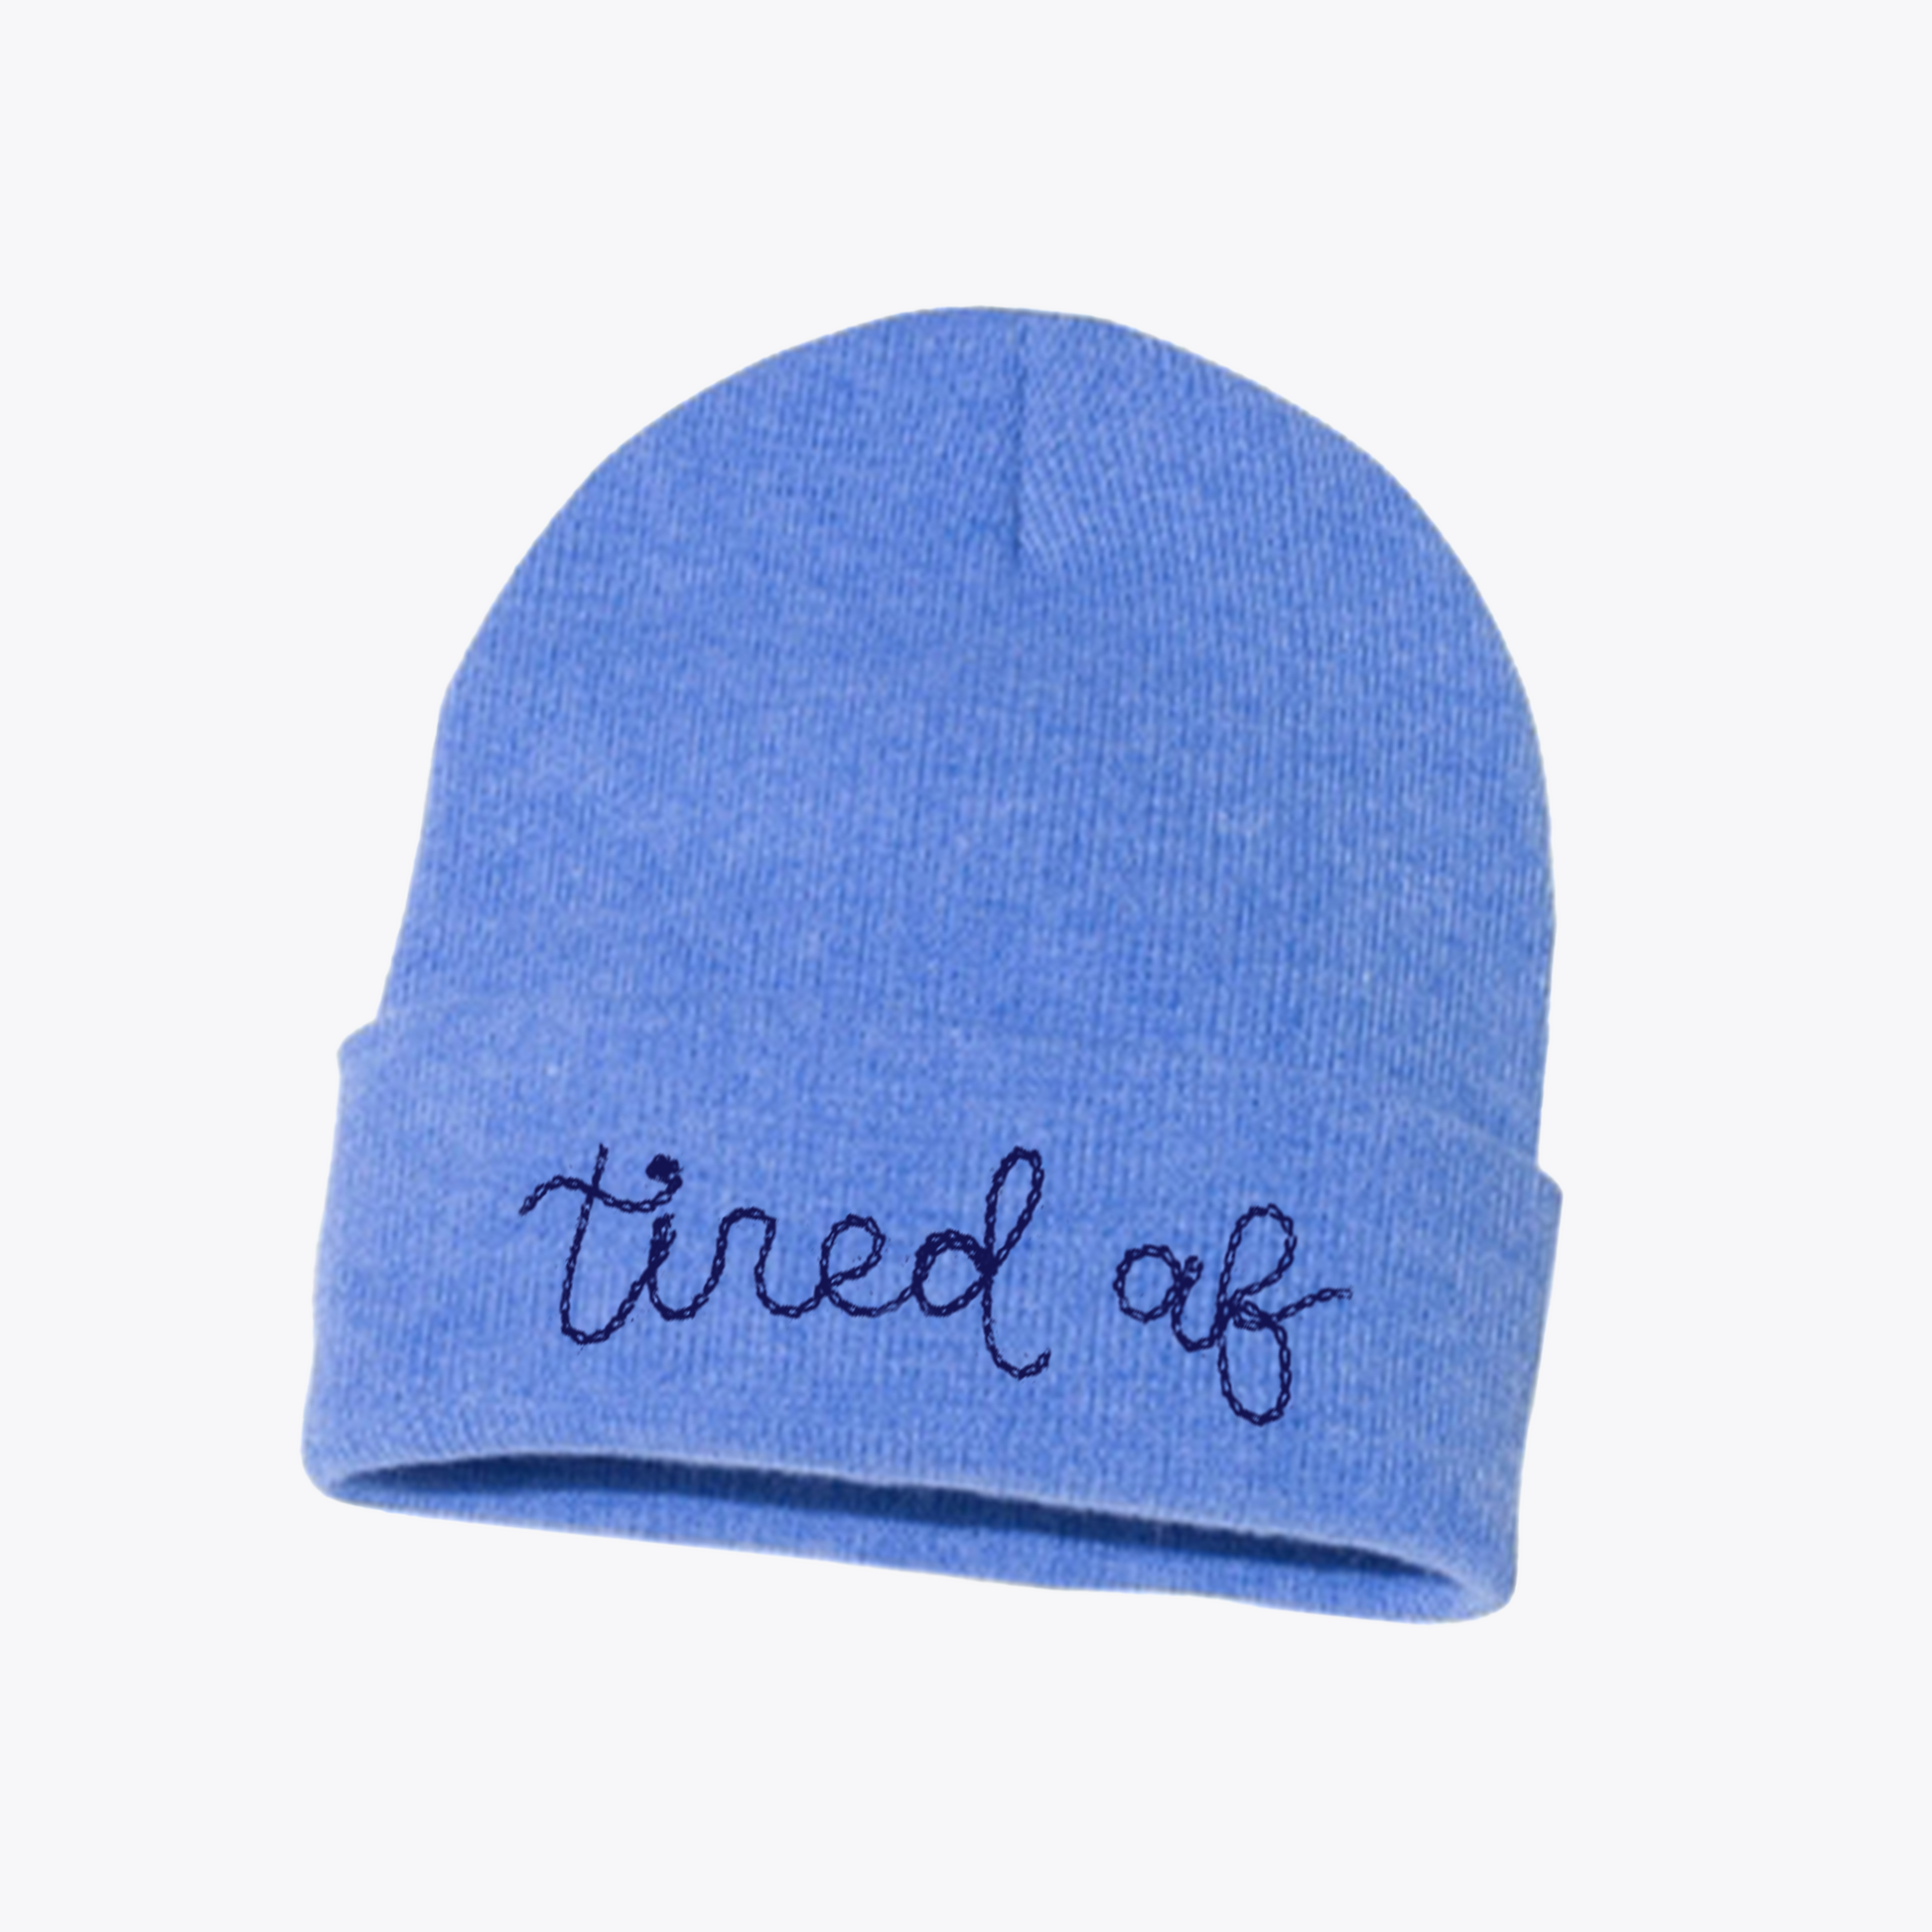 Customizable Chainstitch Kait Beanie Makes Embroidered –